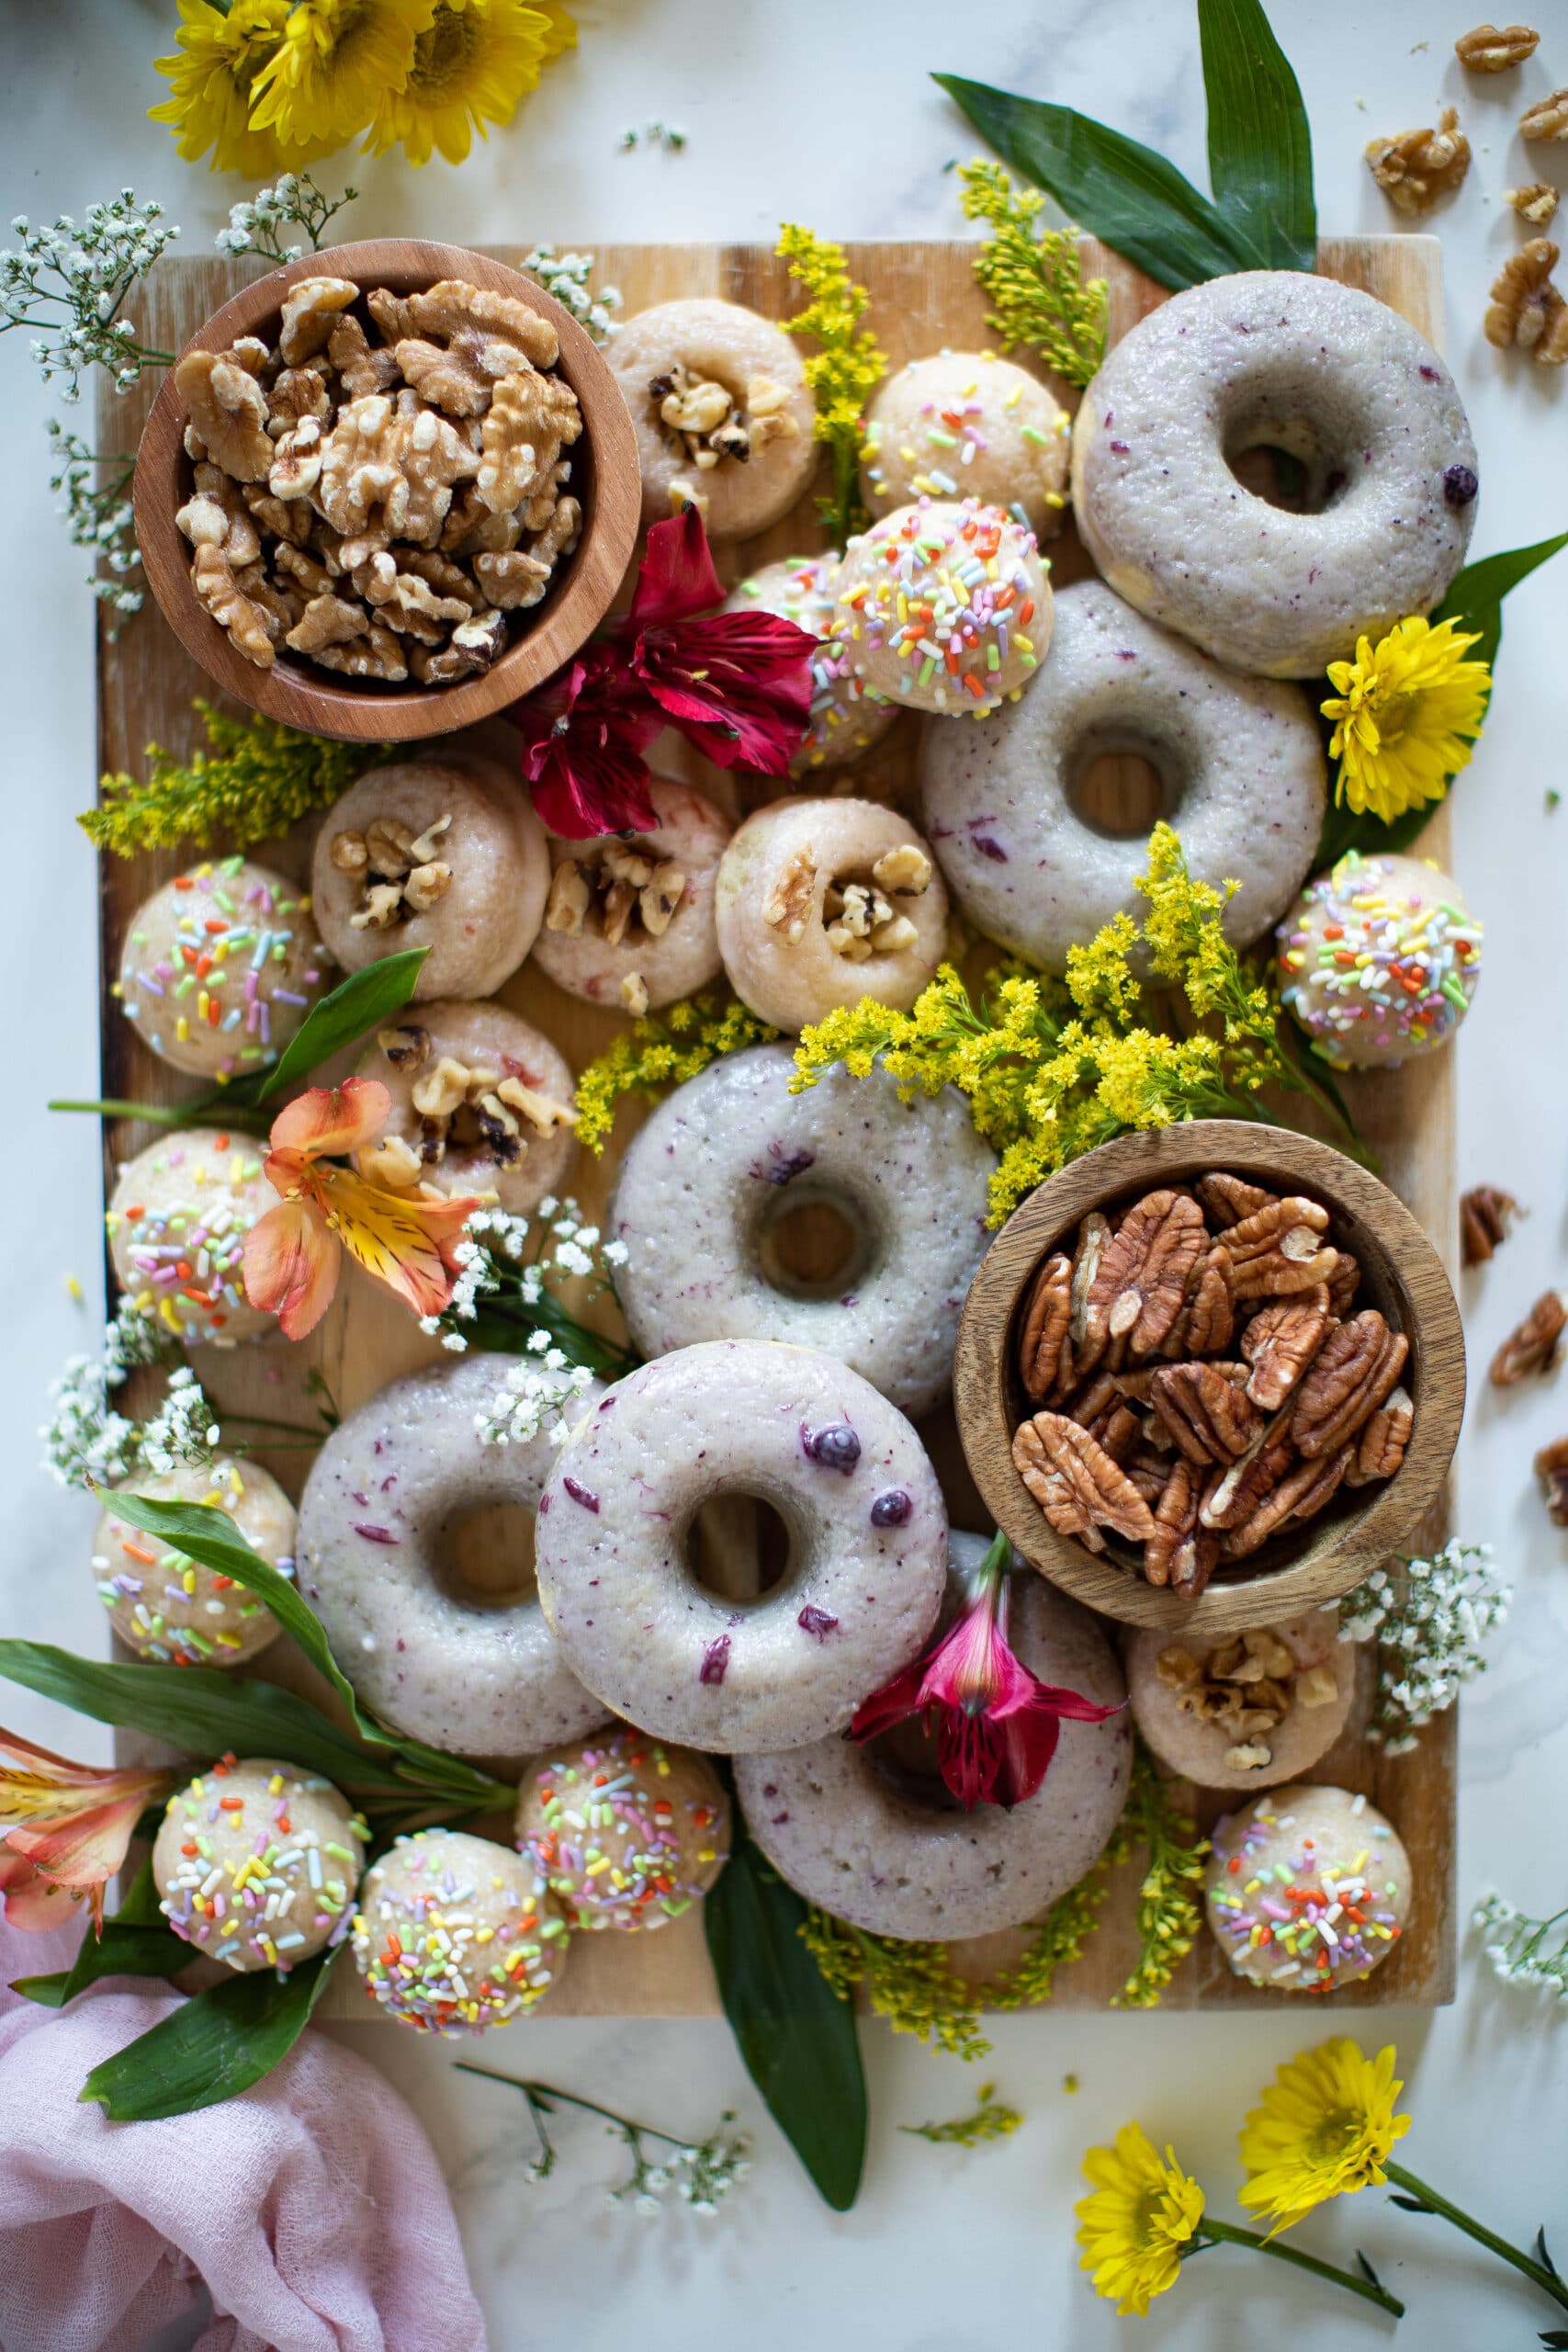 Dessert board featuring Vegan Vanilla Pecan Donuts, other treats, flowers, and nuts.